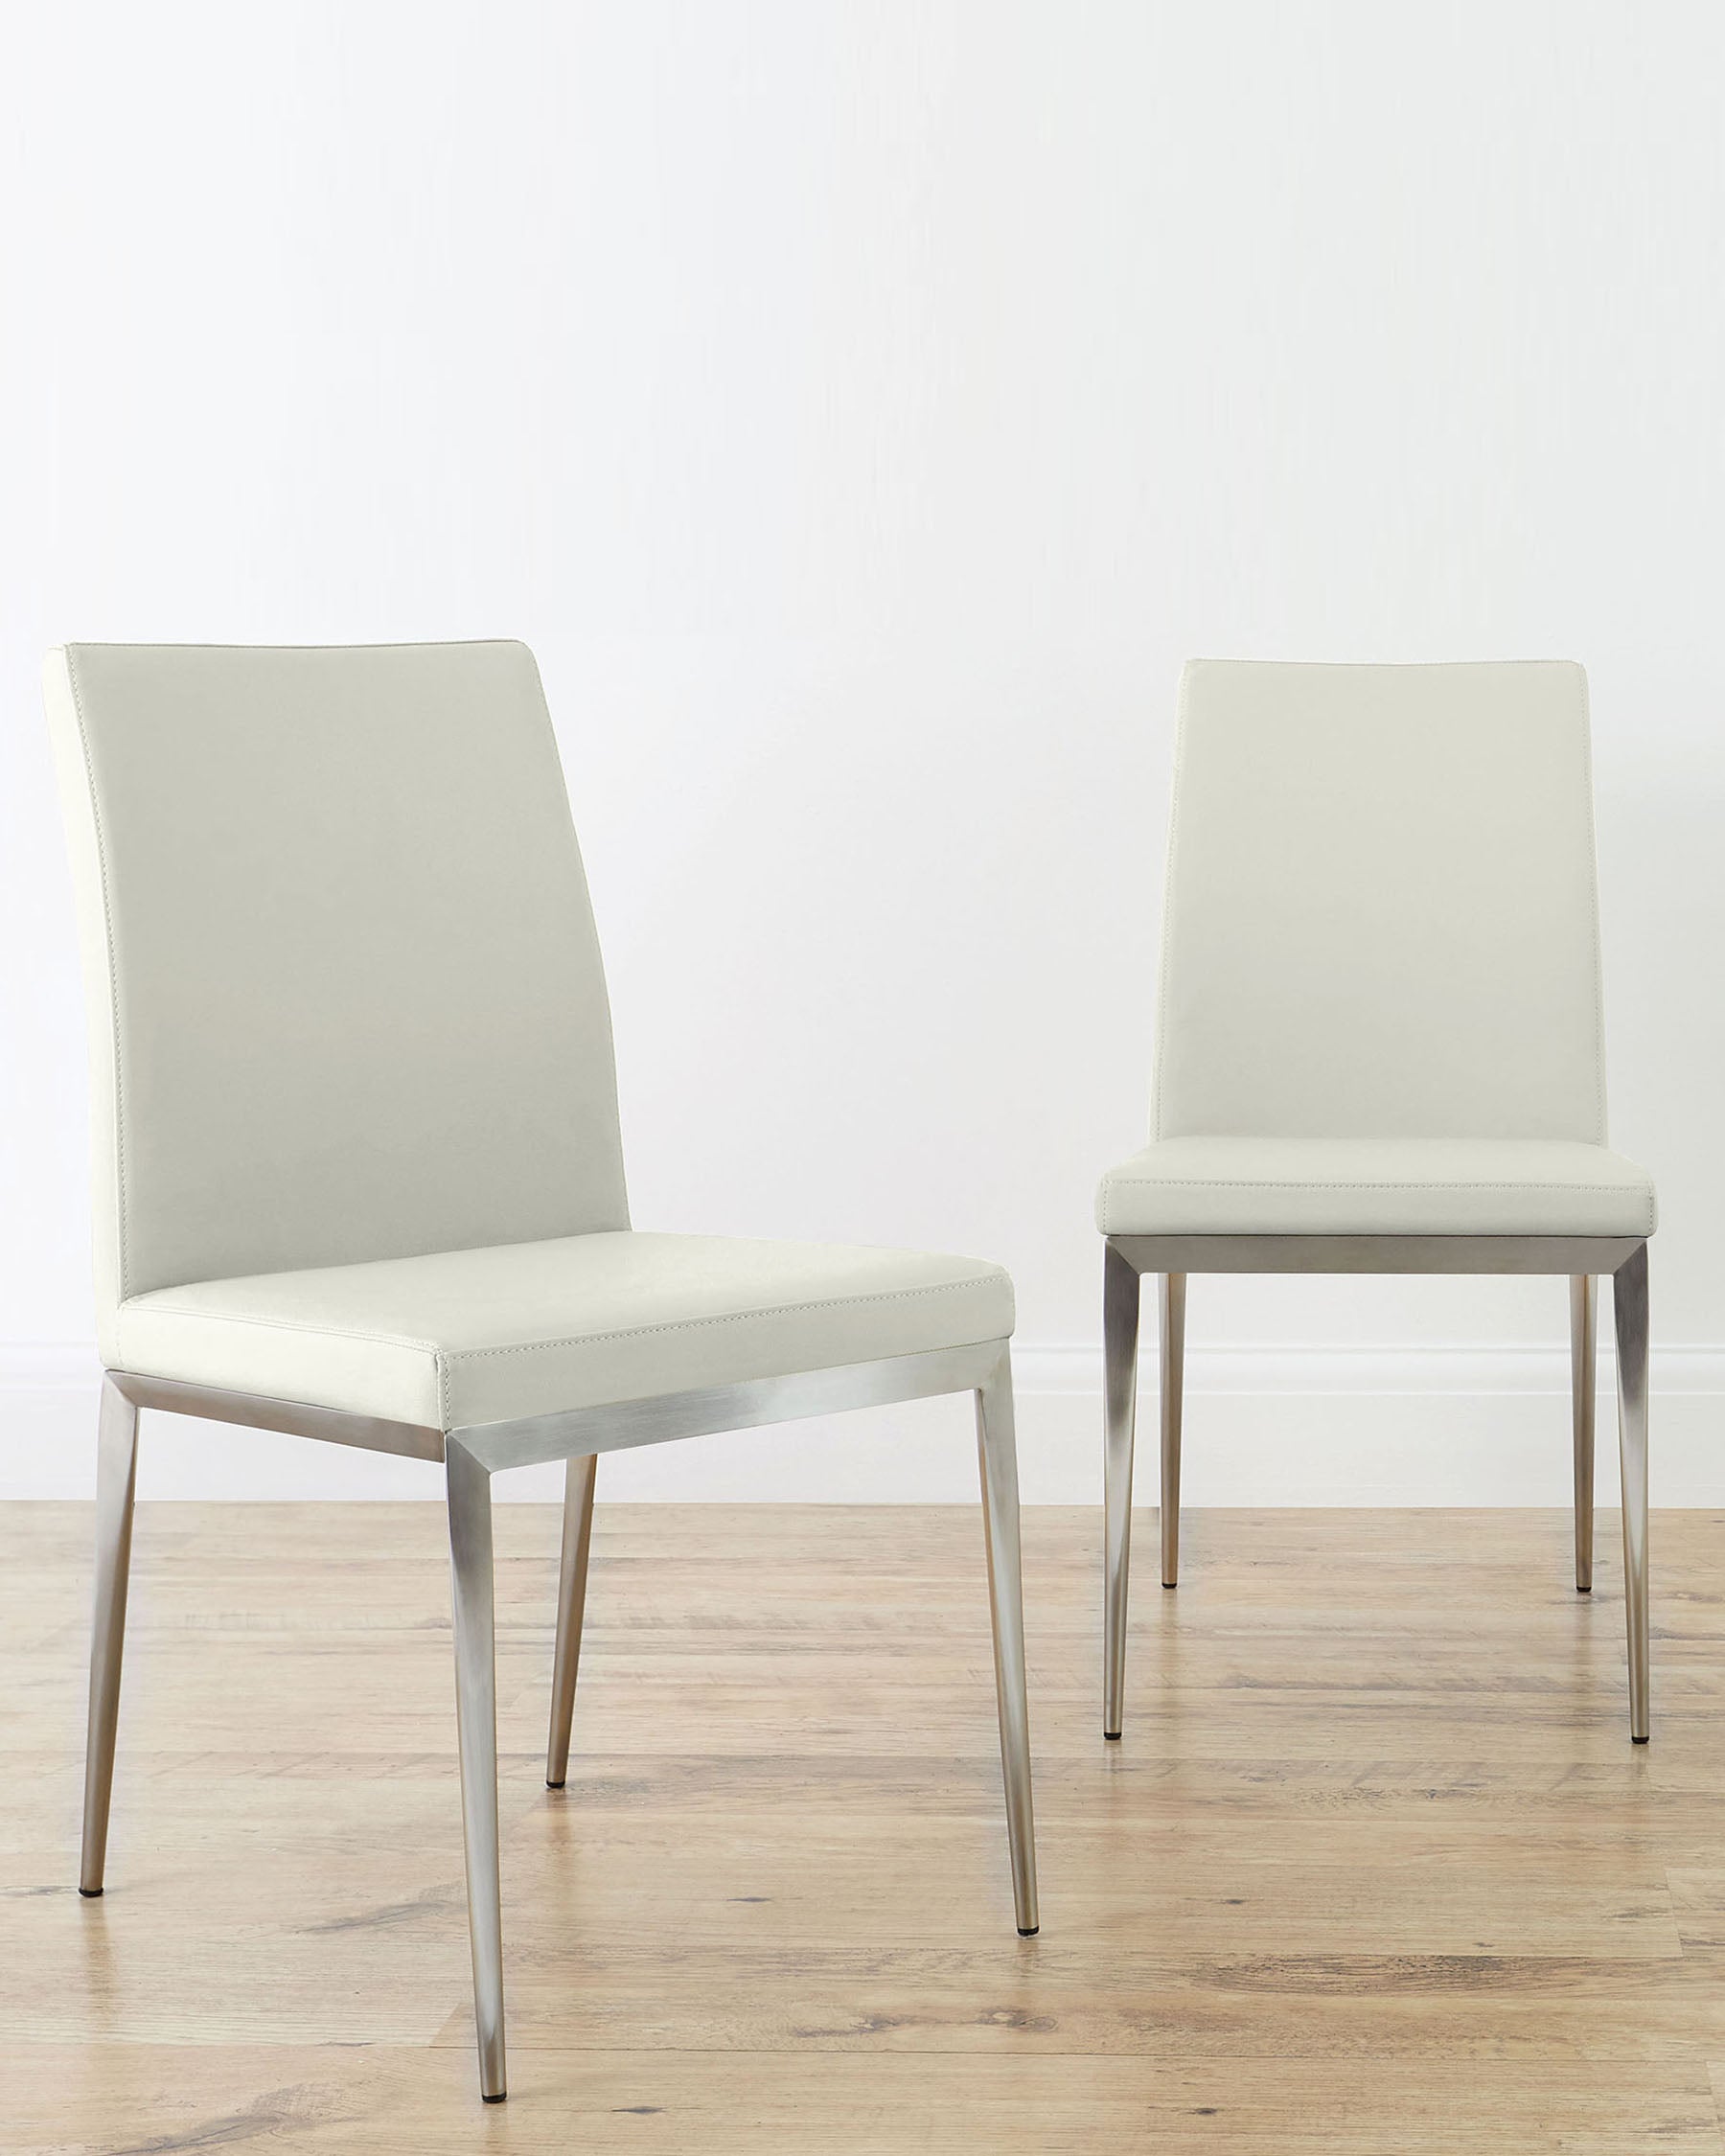 Lucia White & Brushed Steel Dining Chair - Set Of 2